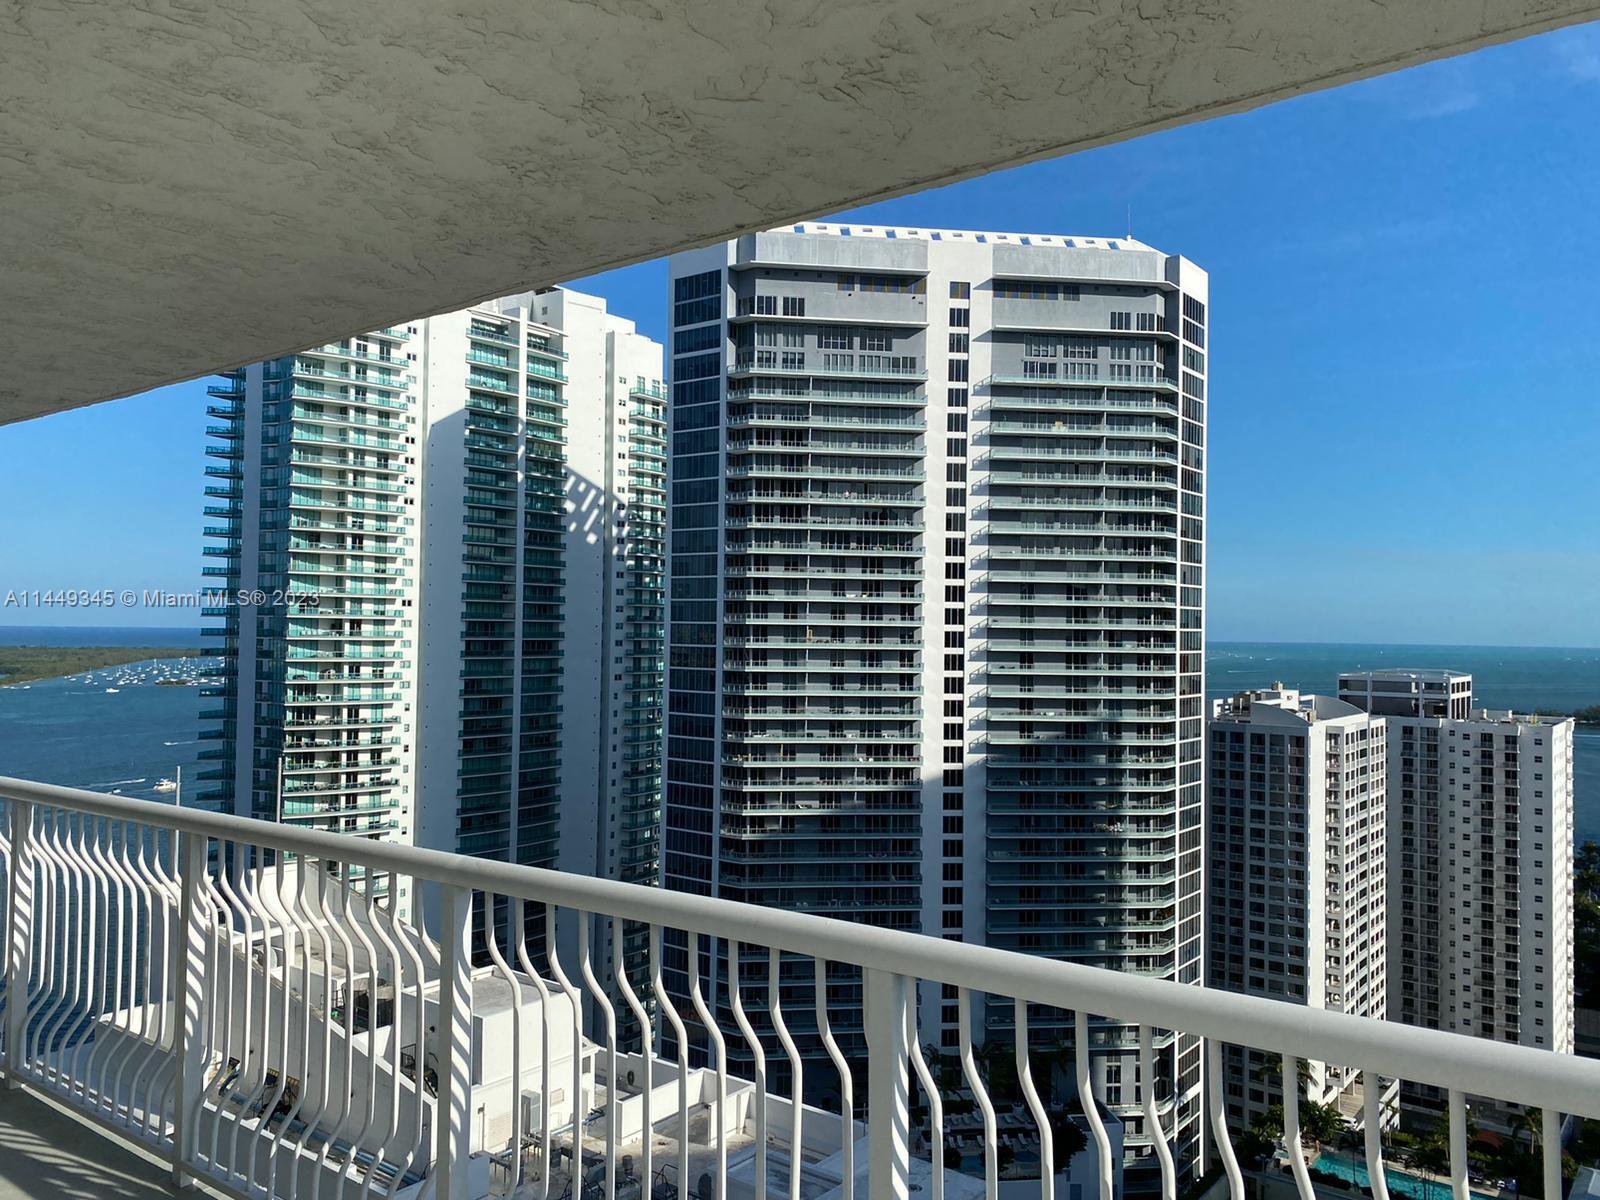 Photo 22 of The Club At Brickell Bay Apt 3723 in Miami - MLS A11449345